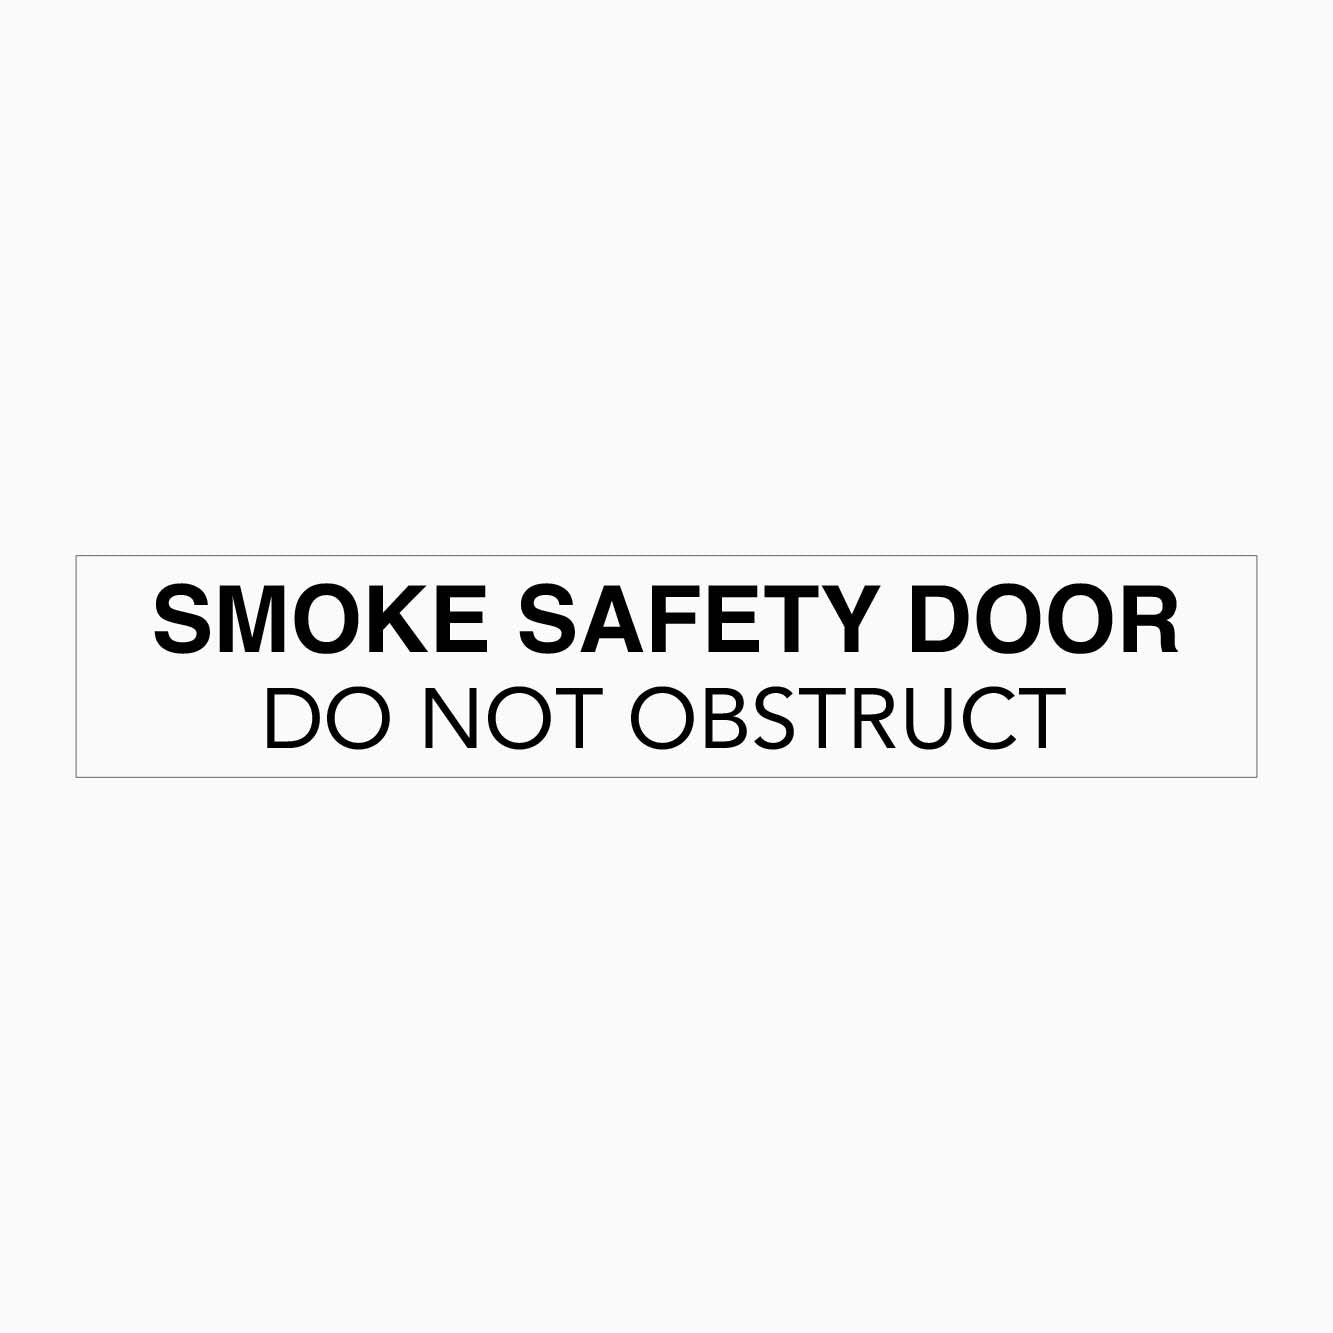 SMOKE SAFETY DOOR SIGN - GET SIGNS